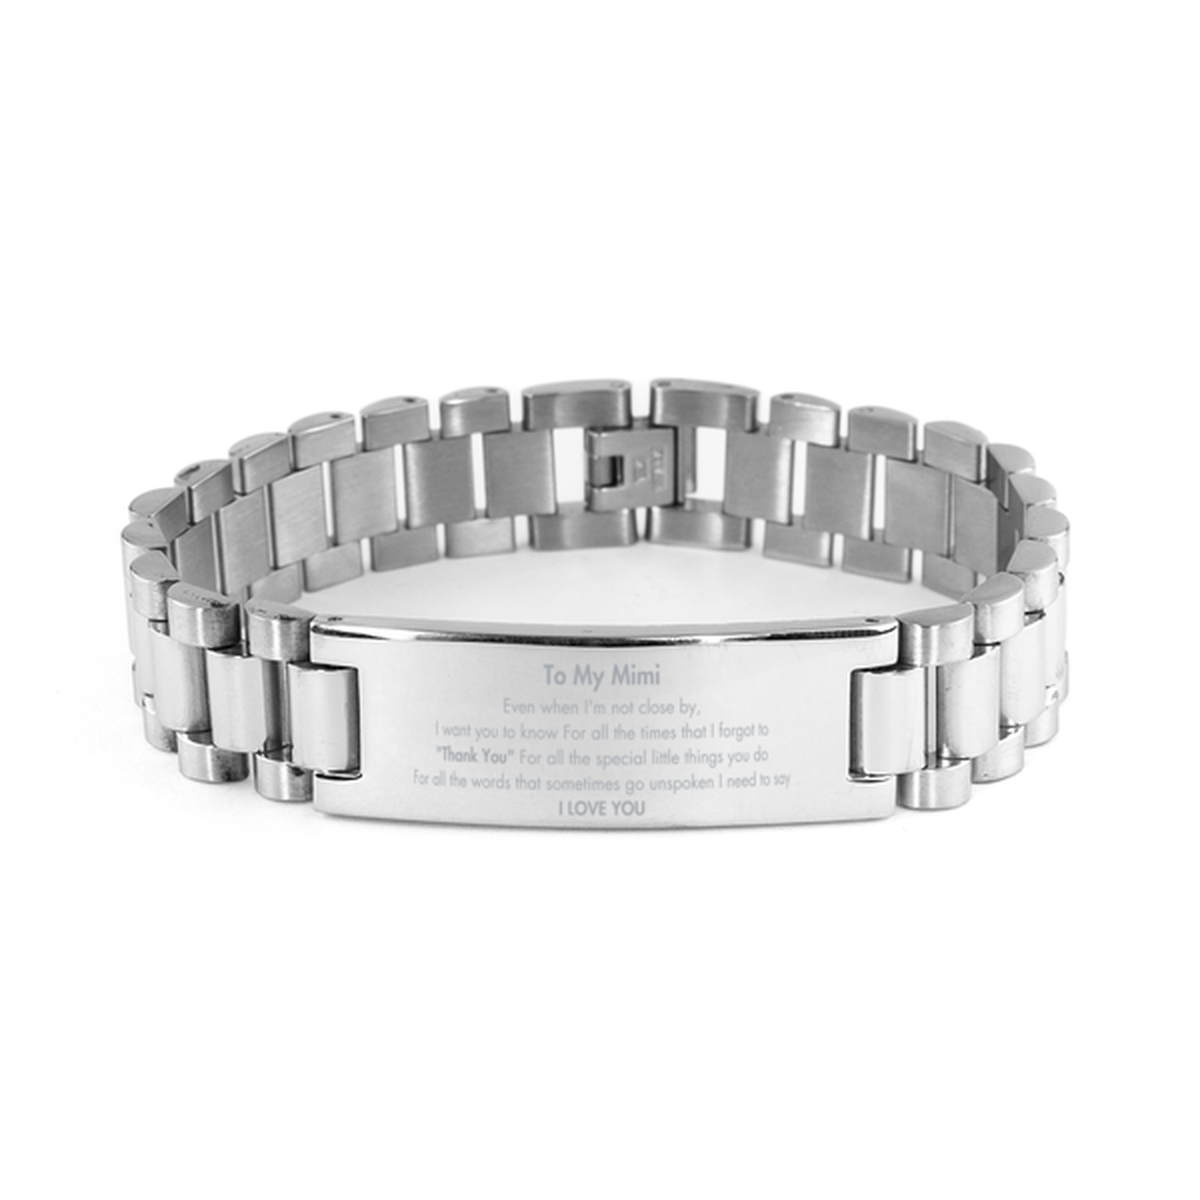 Thank You Gifts for Mimi, Keepsake Ladder Stainless Steel Bracelet Gifts for Mimi Birthday Mother's day Father's Day Mimi For all the words That sometimes go unspoken I need to say I LOVE YOU